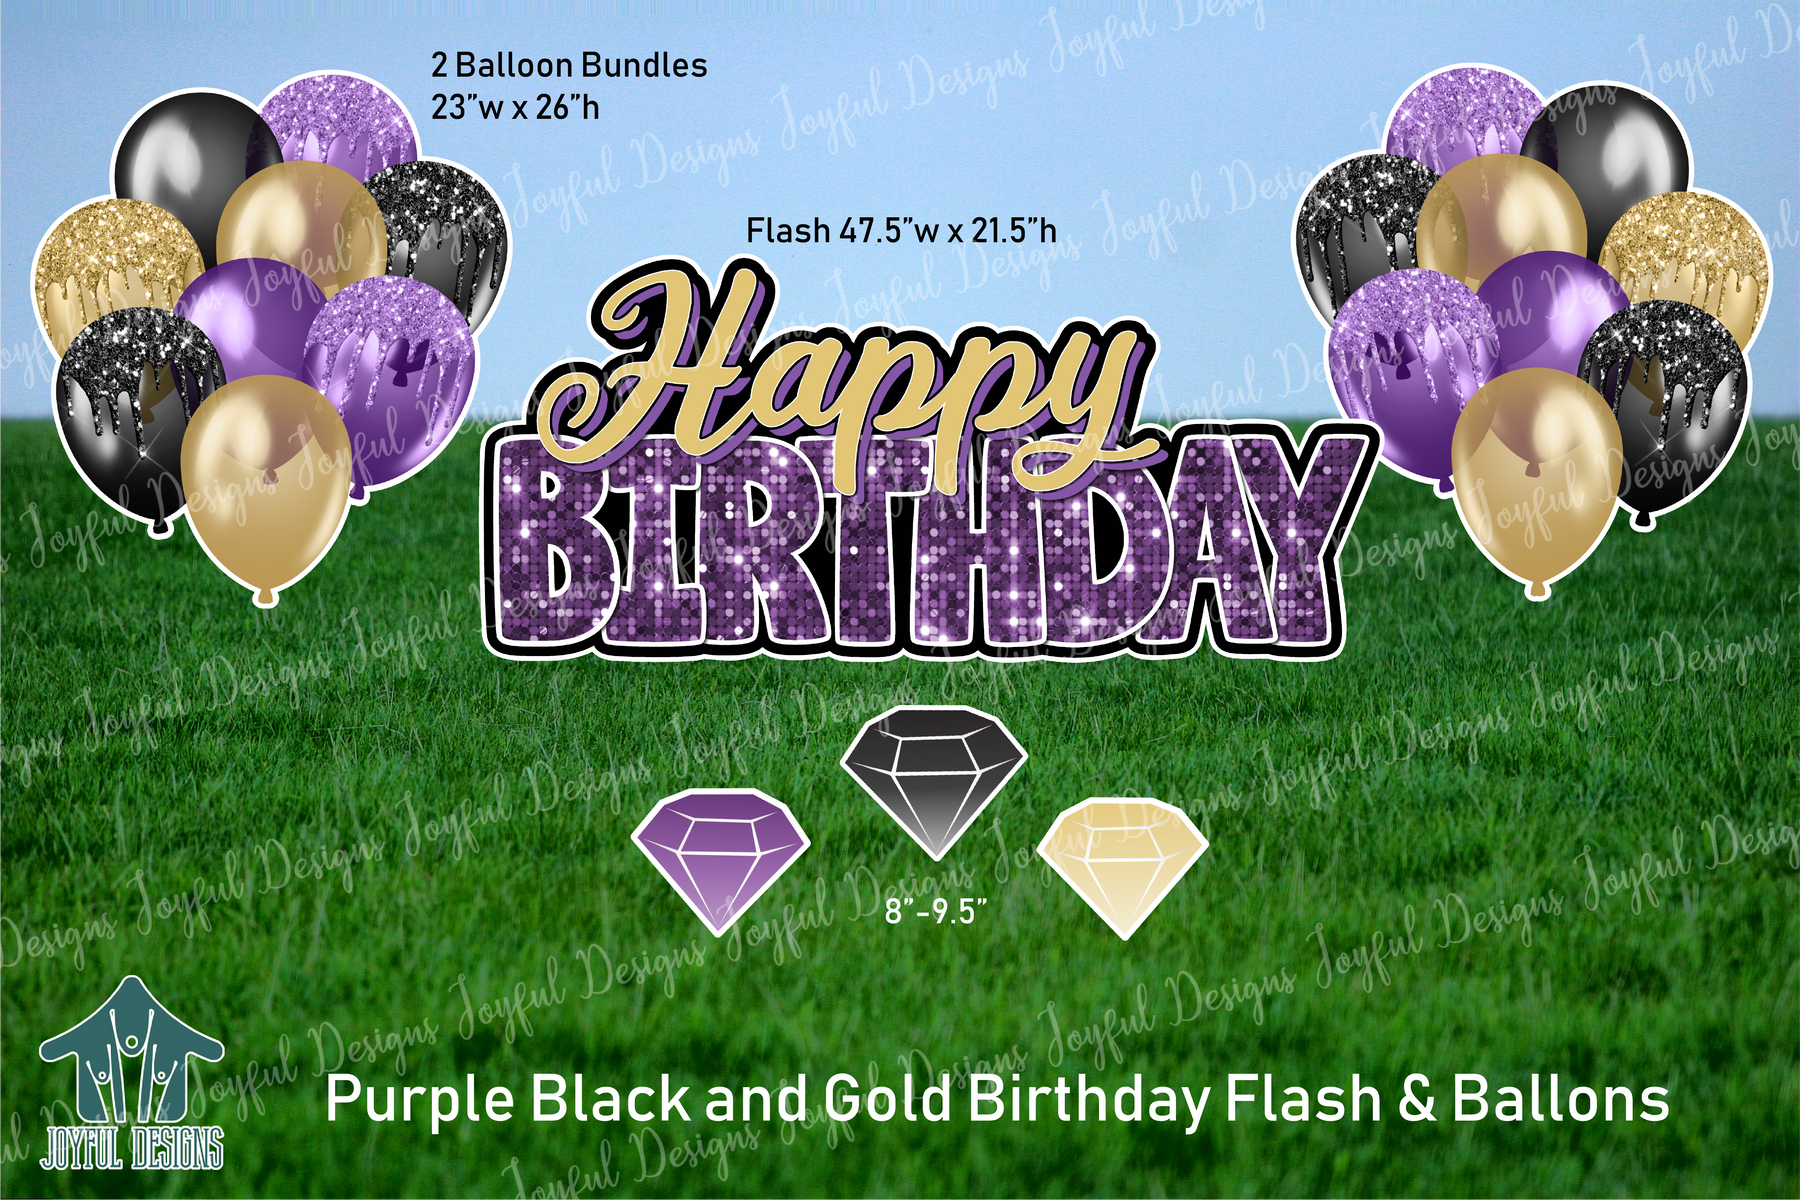 Purple Black and Gold "One and Done" Birthday Set